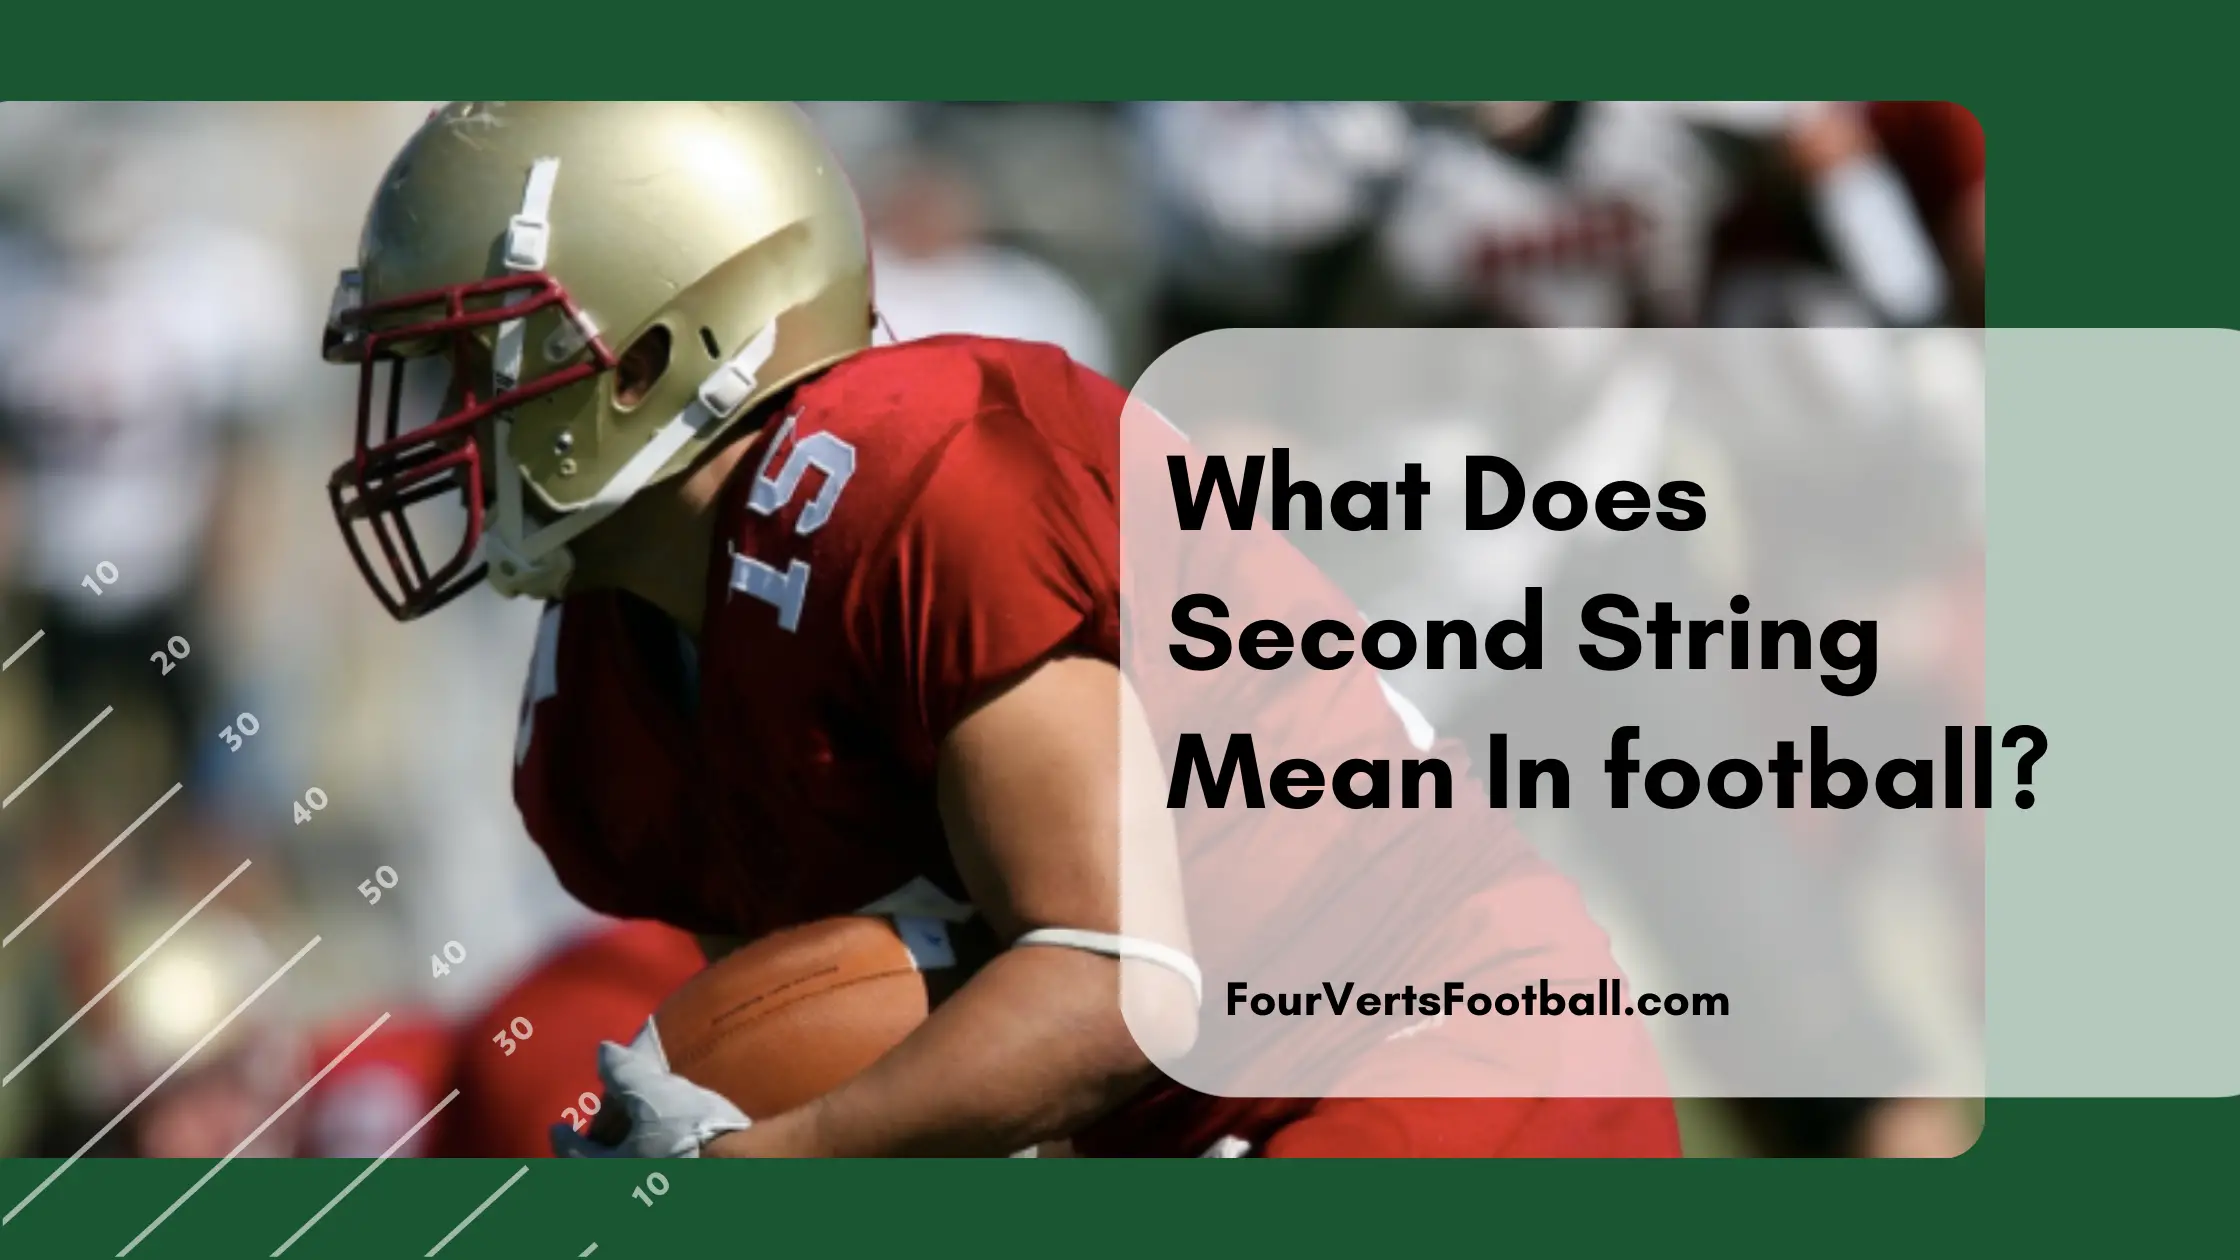 What Does Second String Mean In Football?